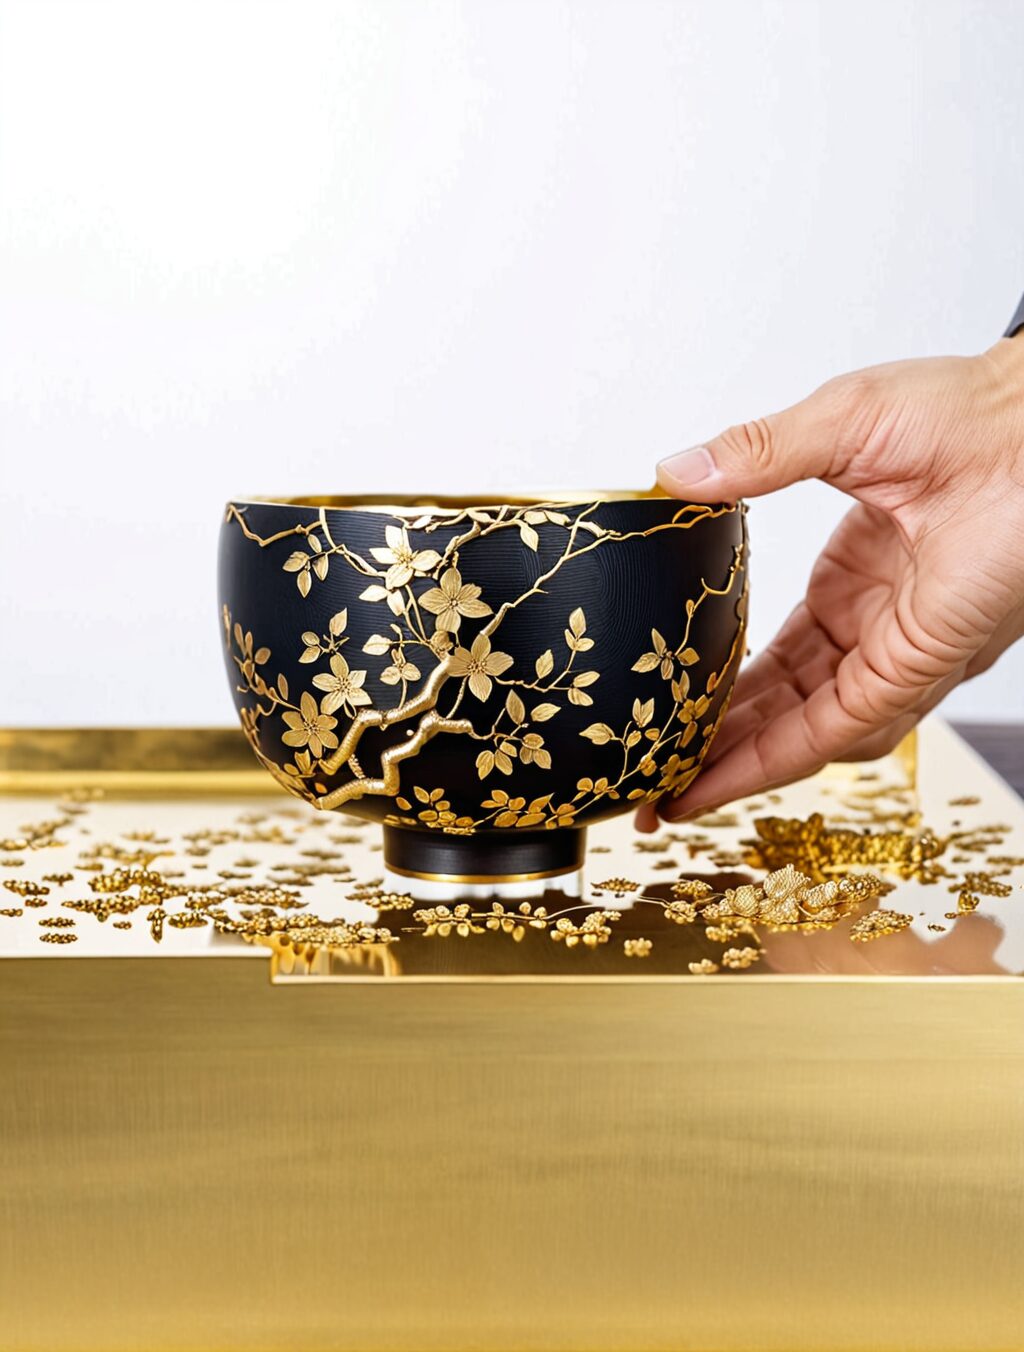 japanese art of repairing with gold